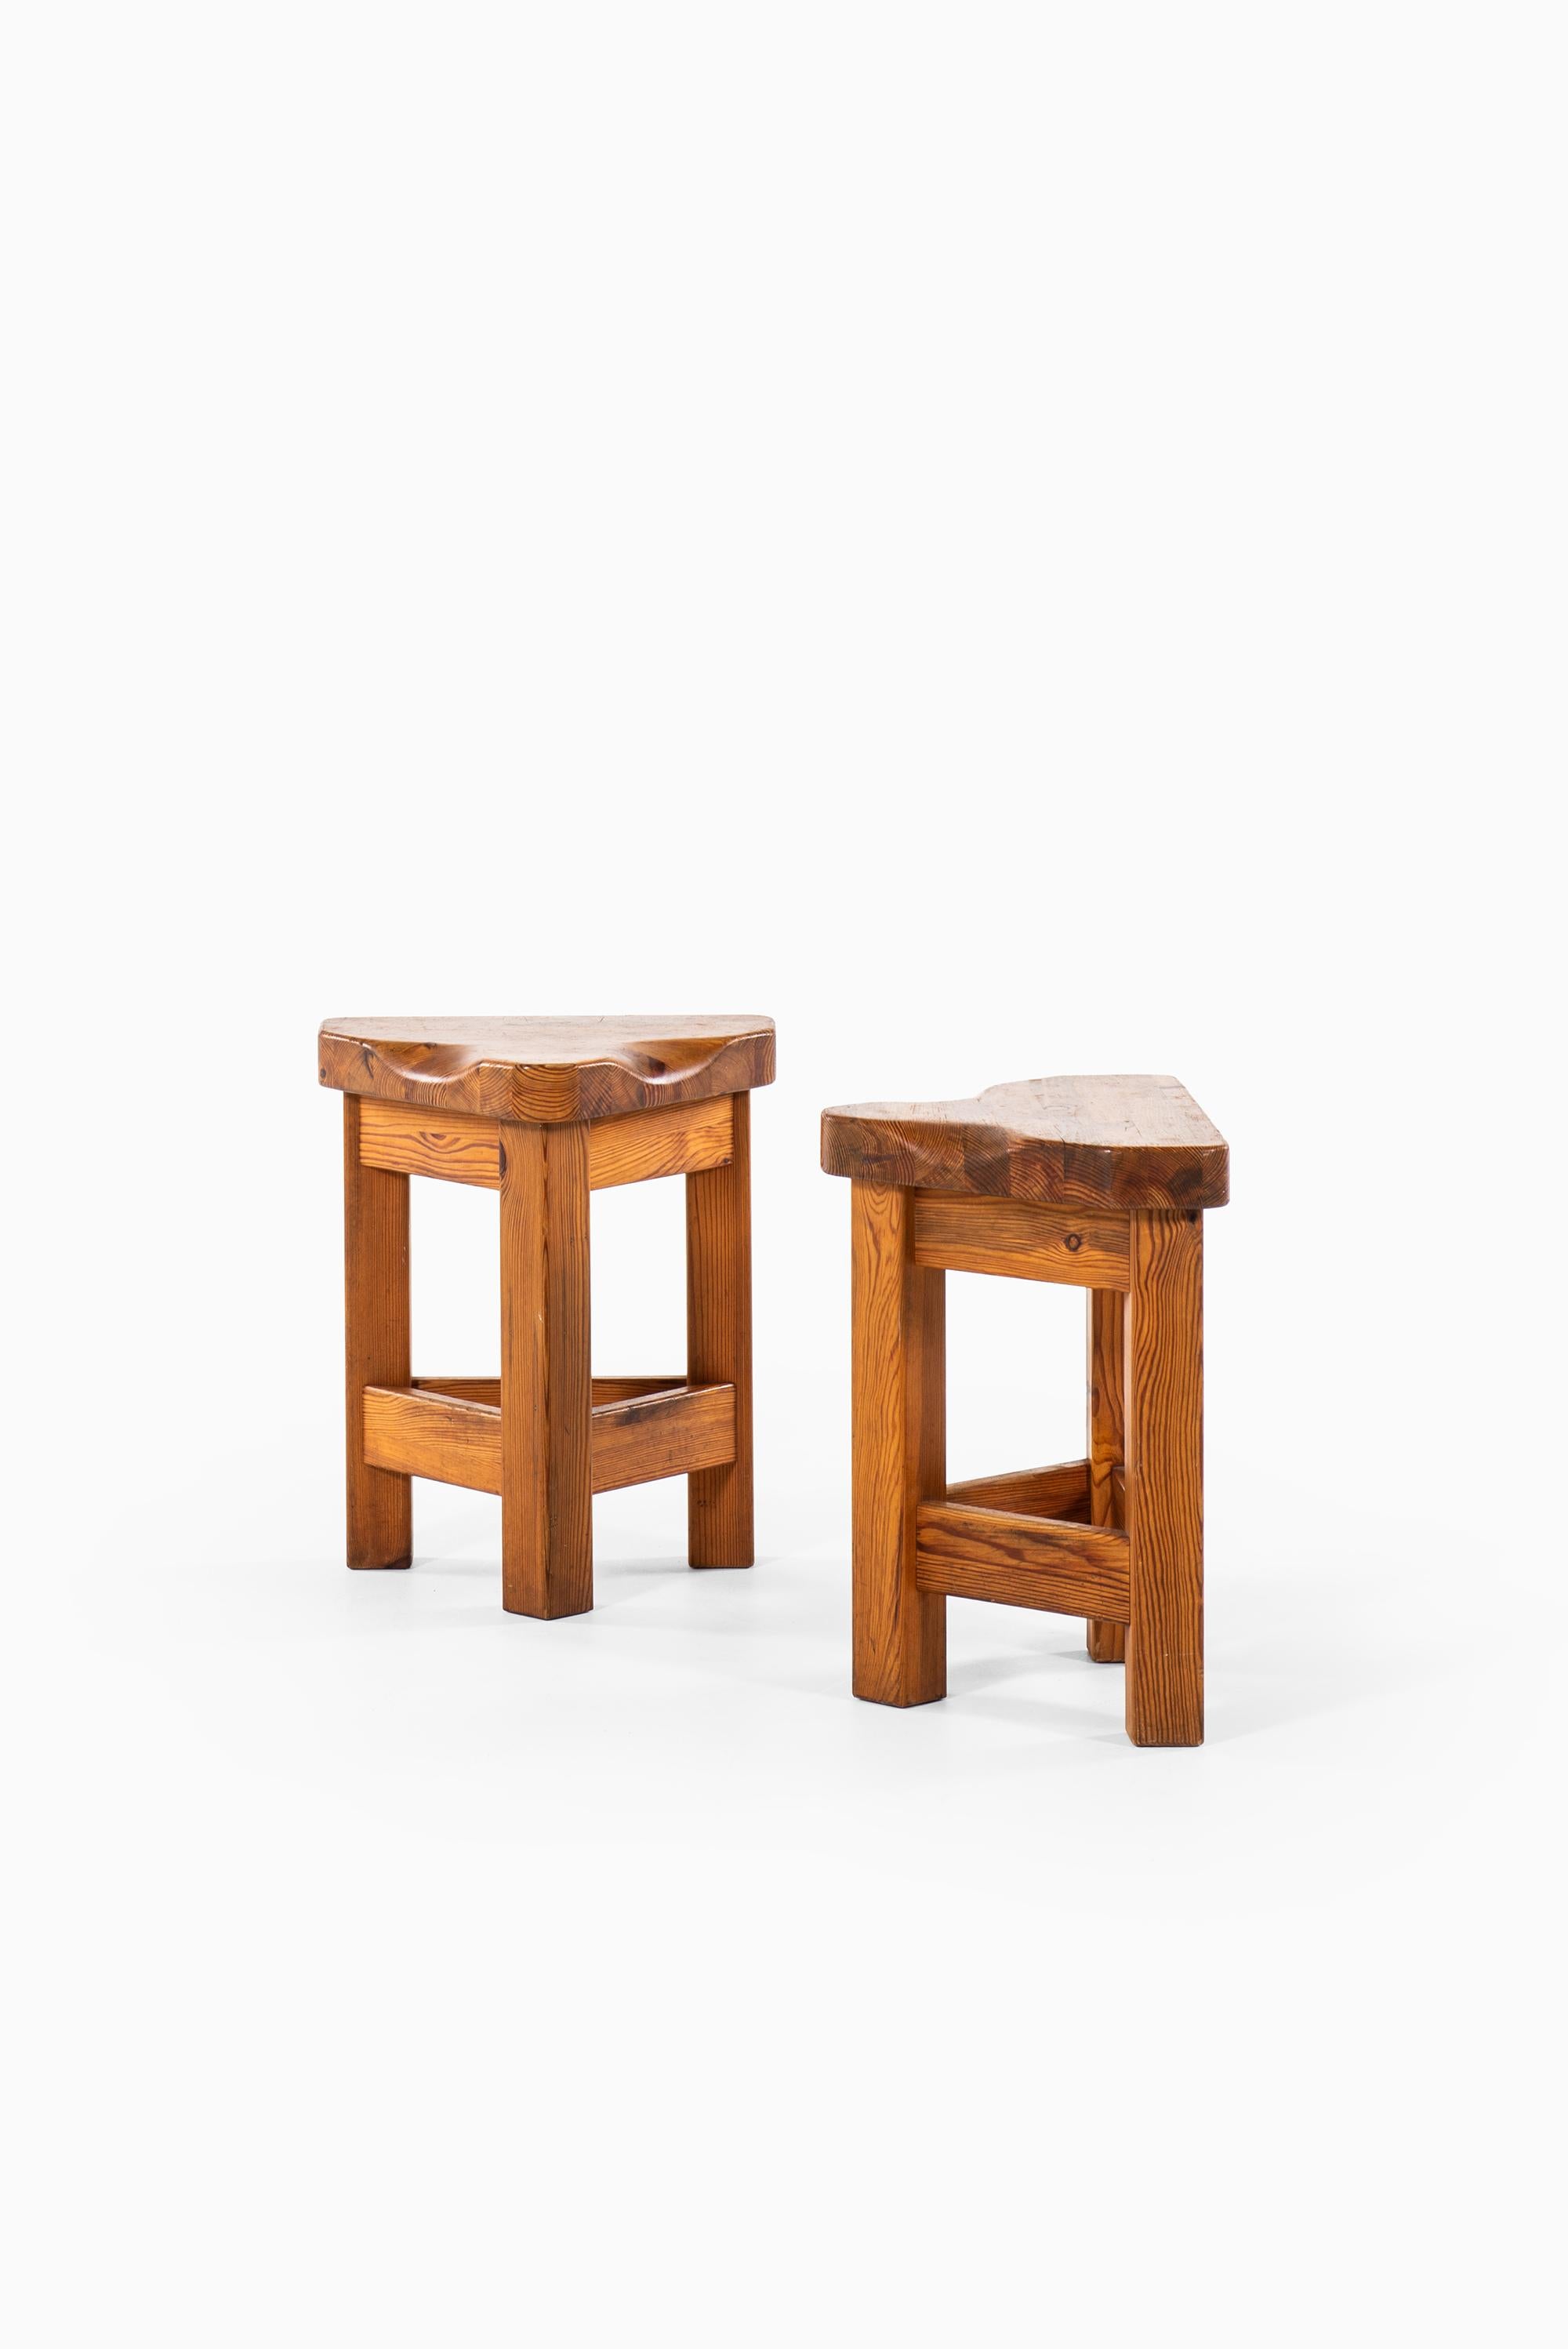 Pair of pine stools in the manner of Roland Wilhelmsson. Produced in Sweden.